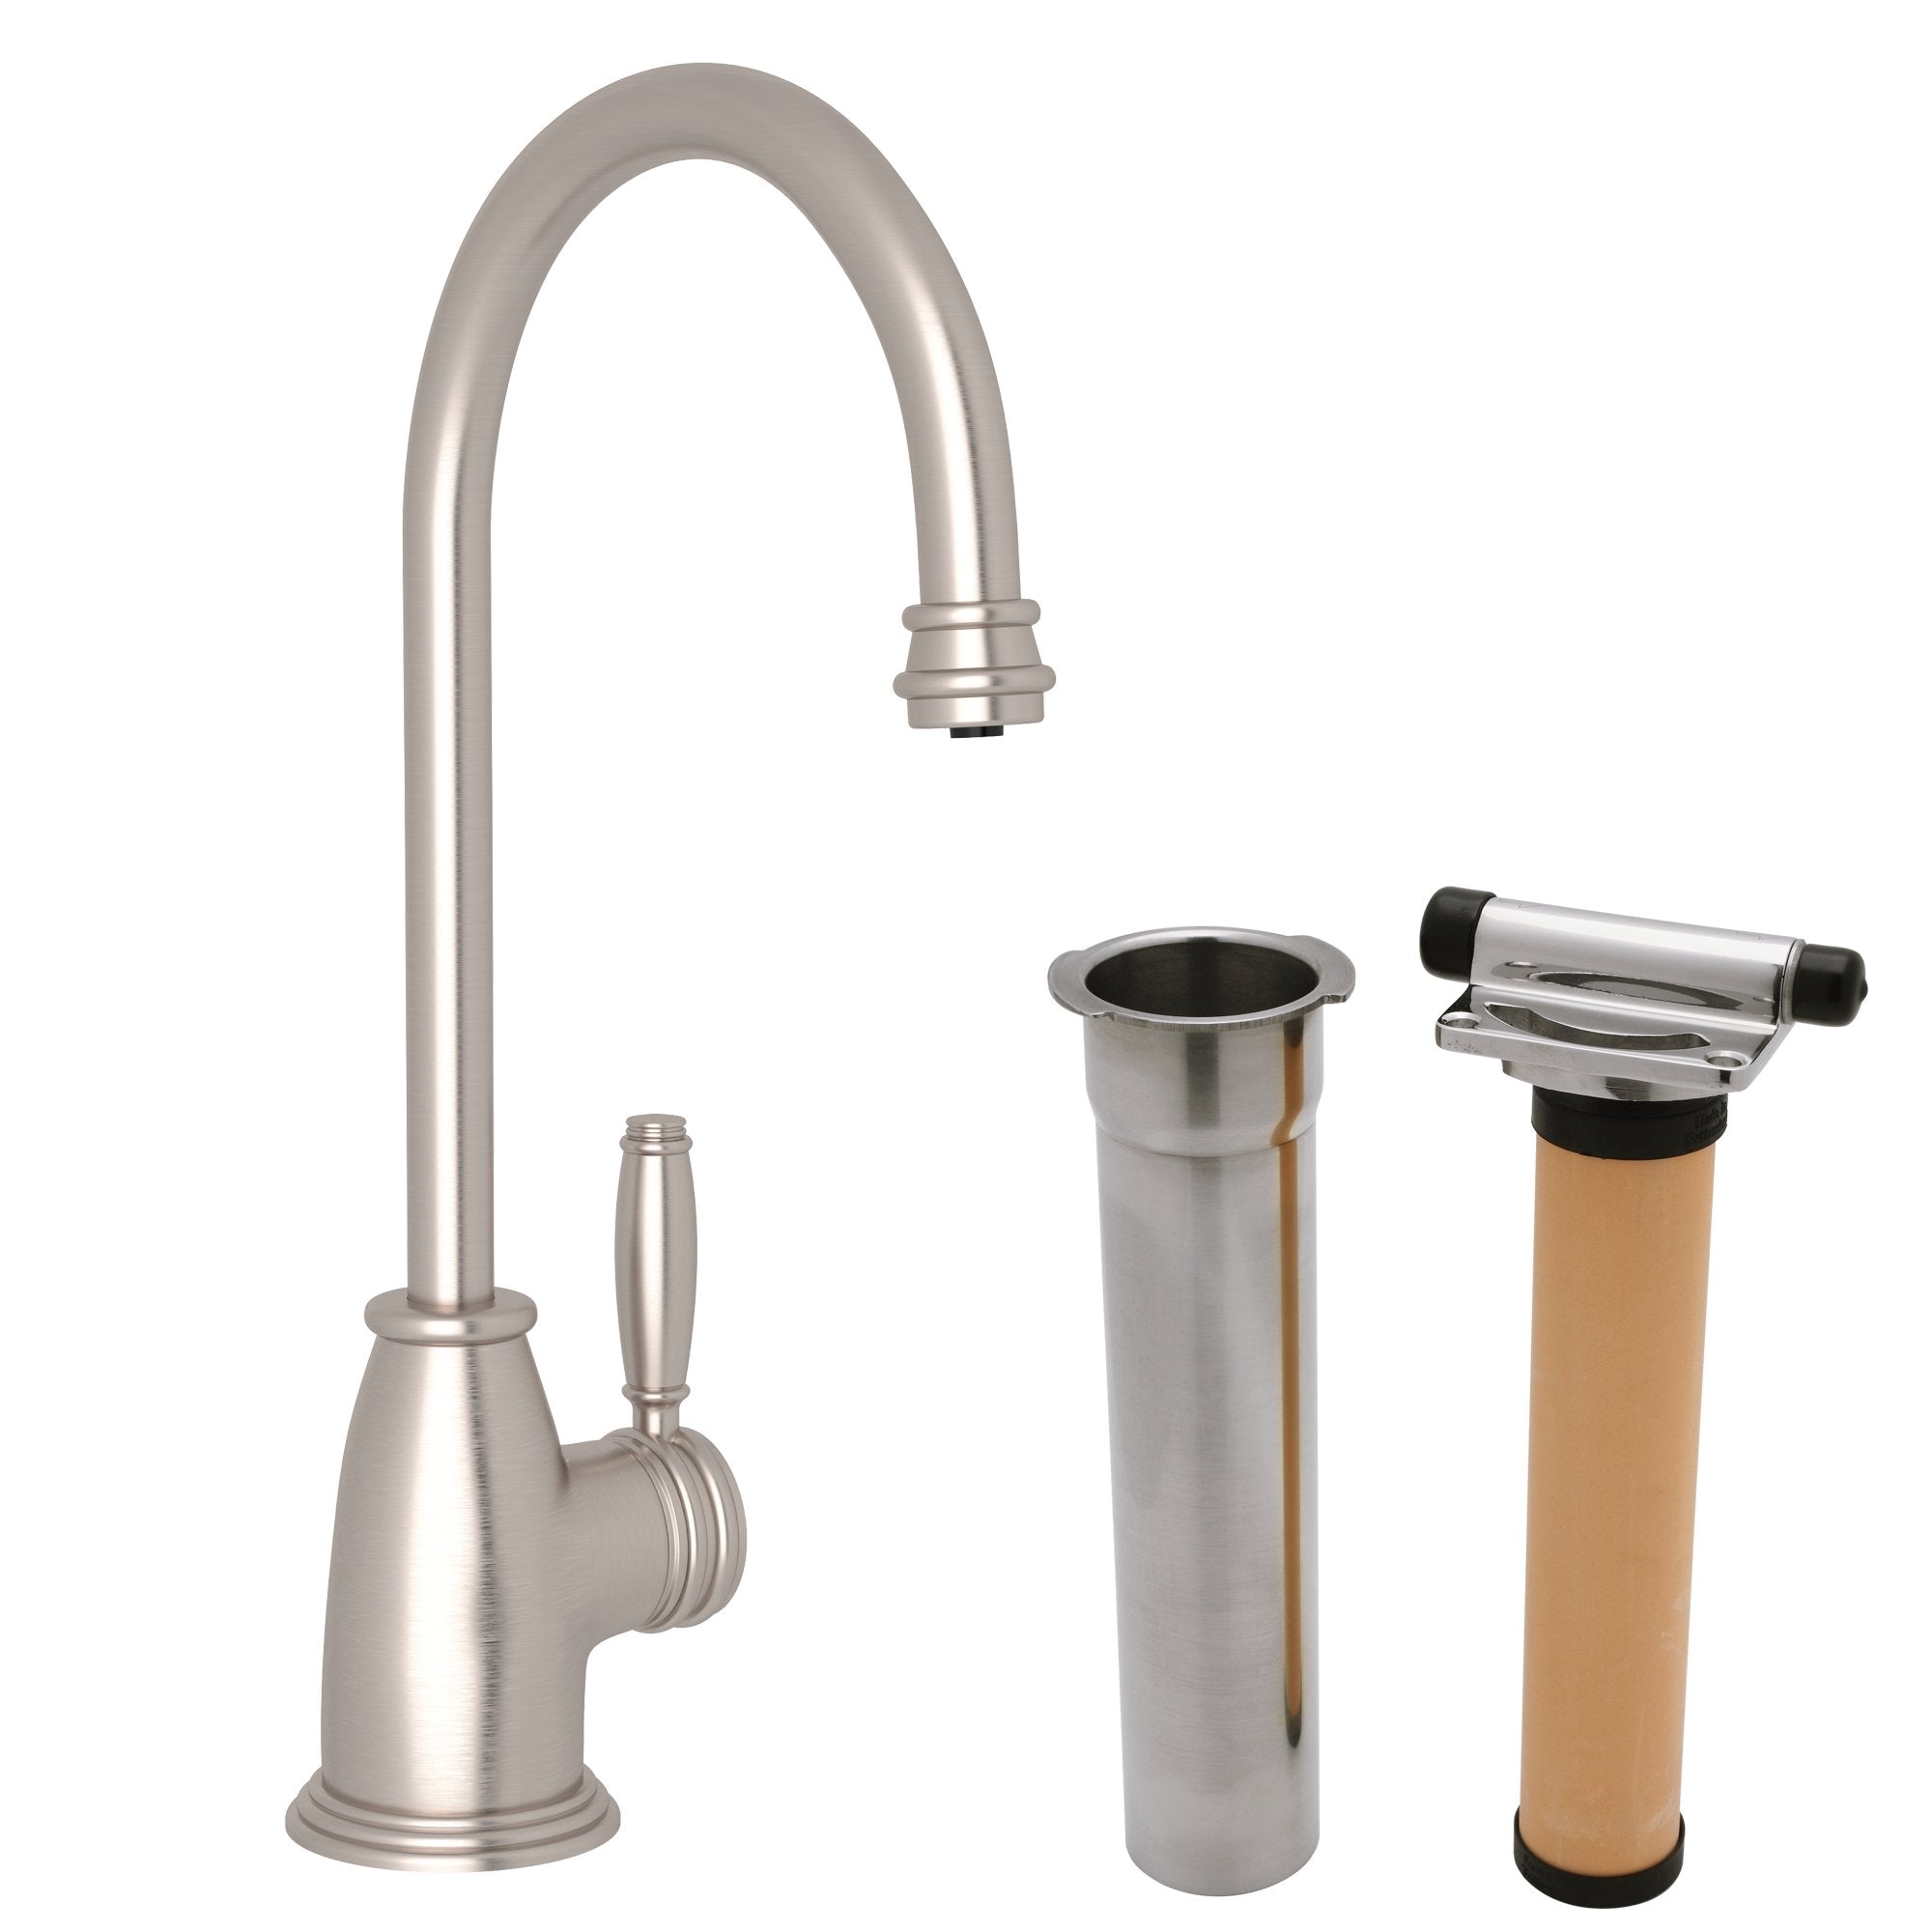 ROHL MBKIT7917 Gotham Filter Kitchen Faucet Kit